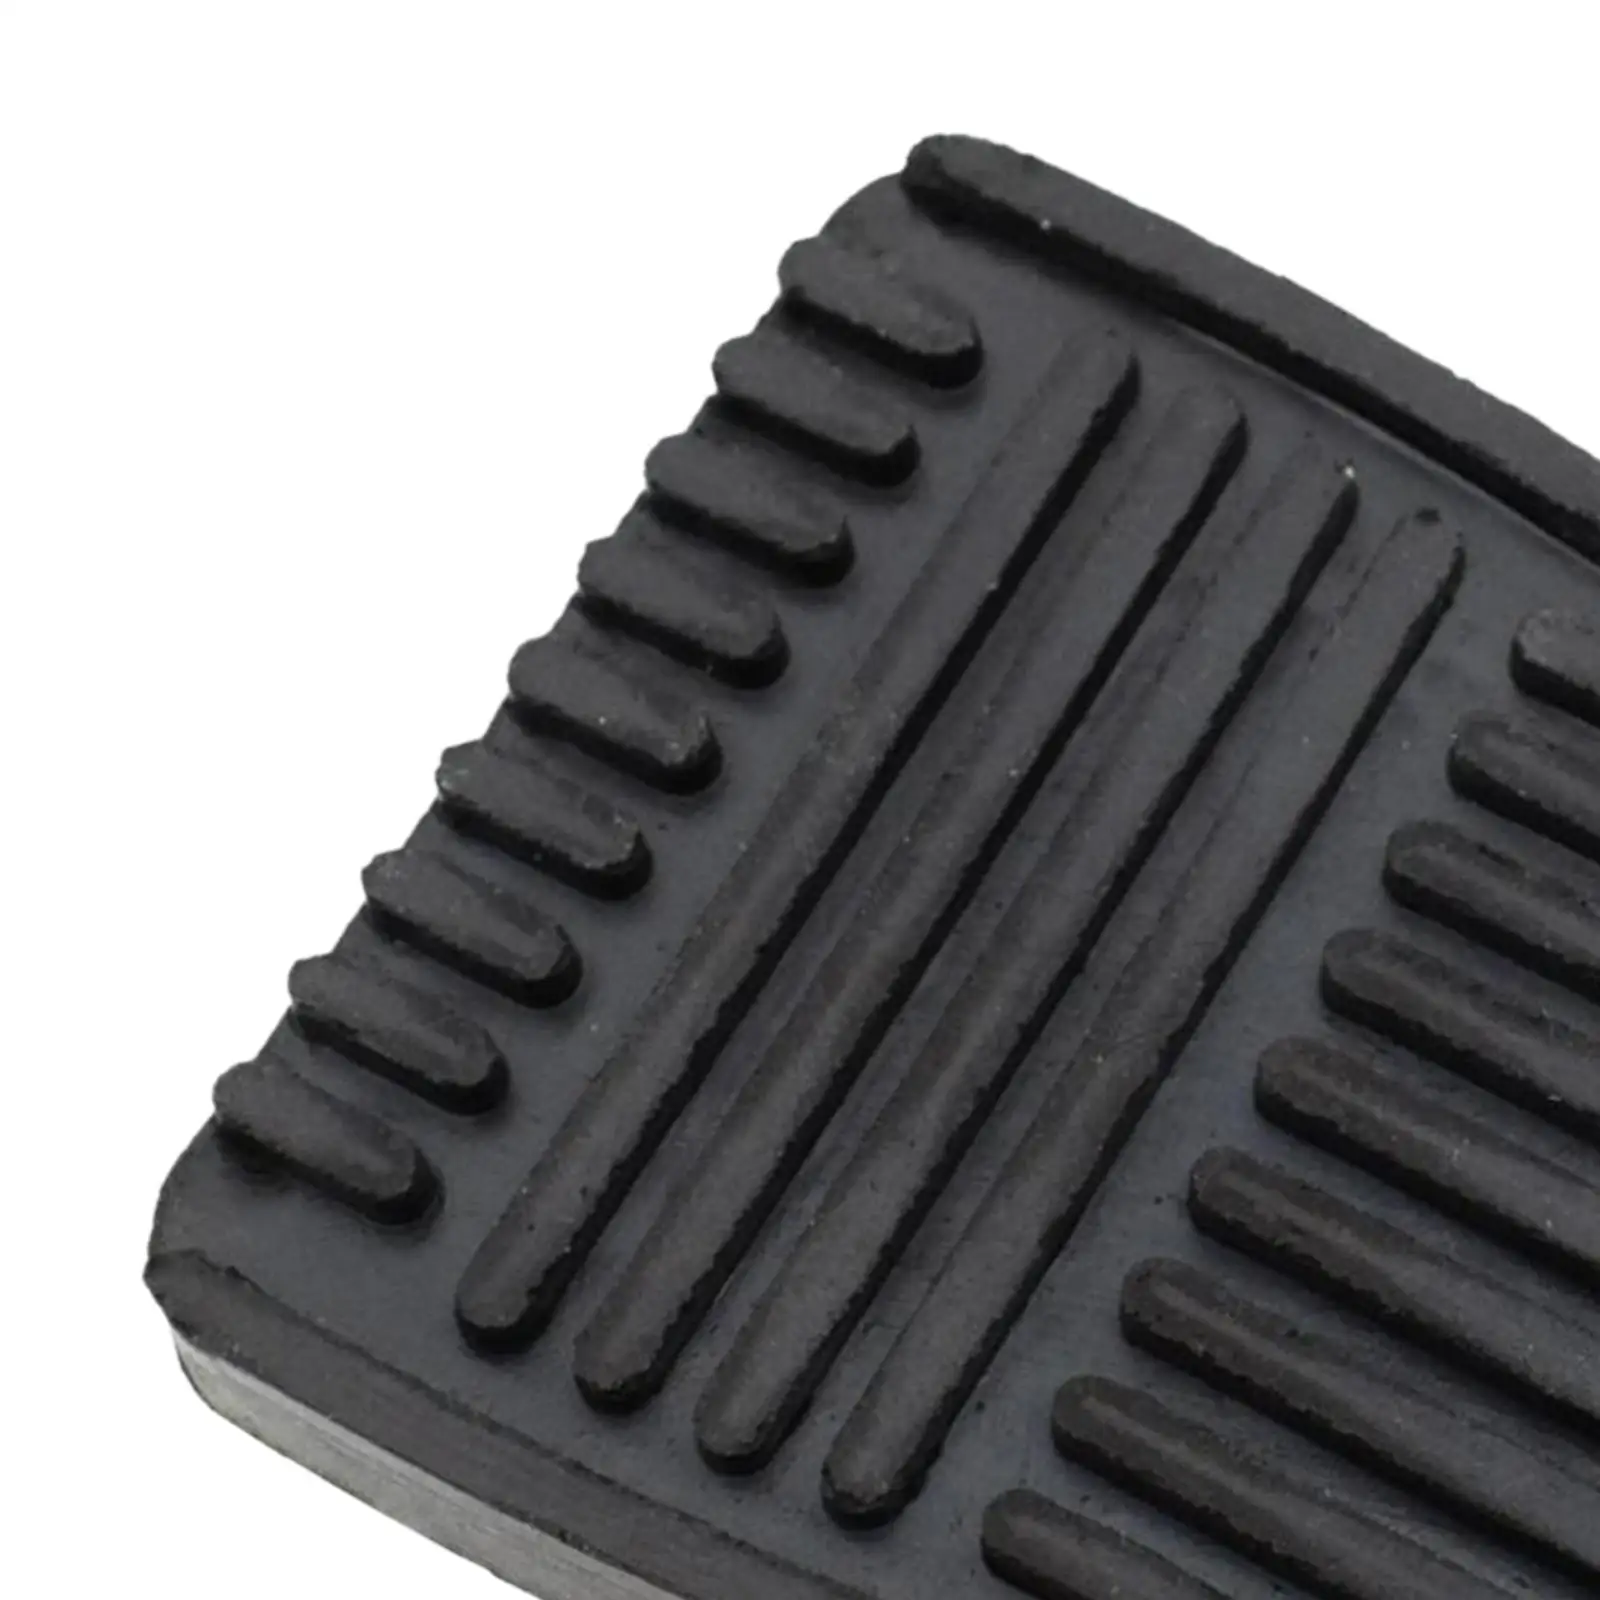 Brake Pedal Rubber Pad 31321-14020 Replaces Brake Clutch Pedal Pad Cover for Pickup